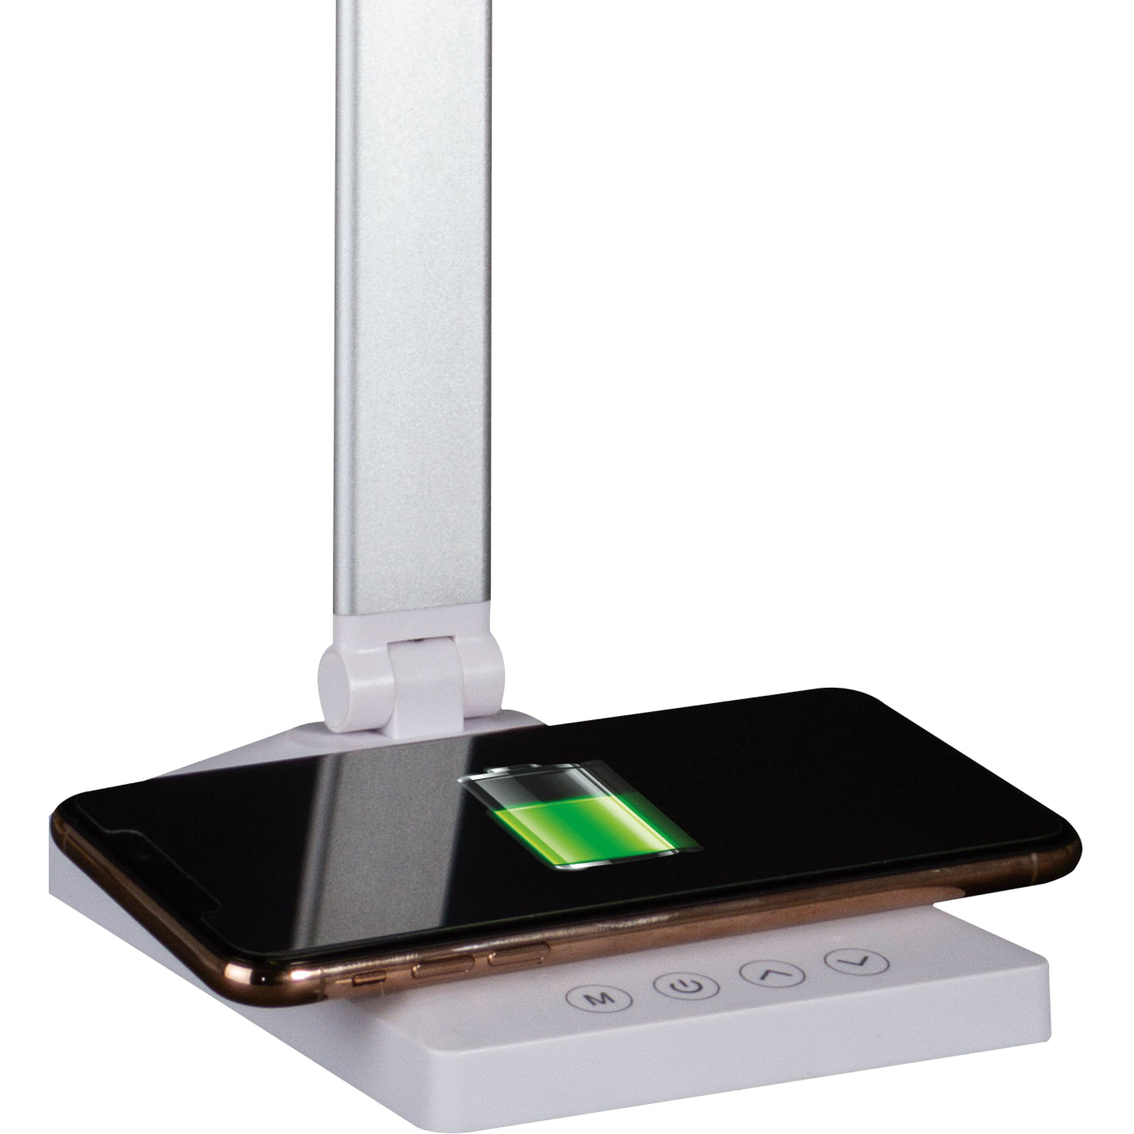 OttLite Entice LED Desk Lamp with Wireless Charging - Image 3 of 7